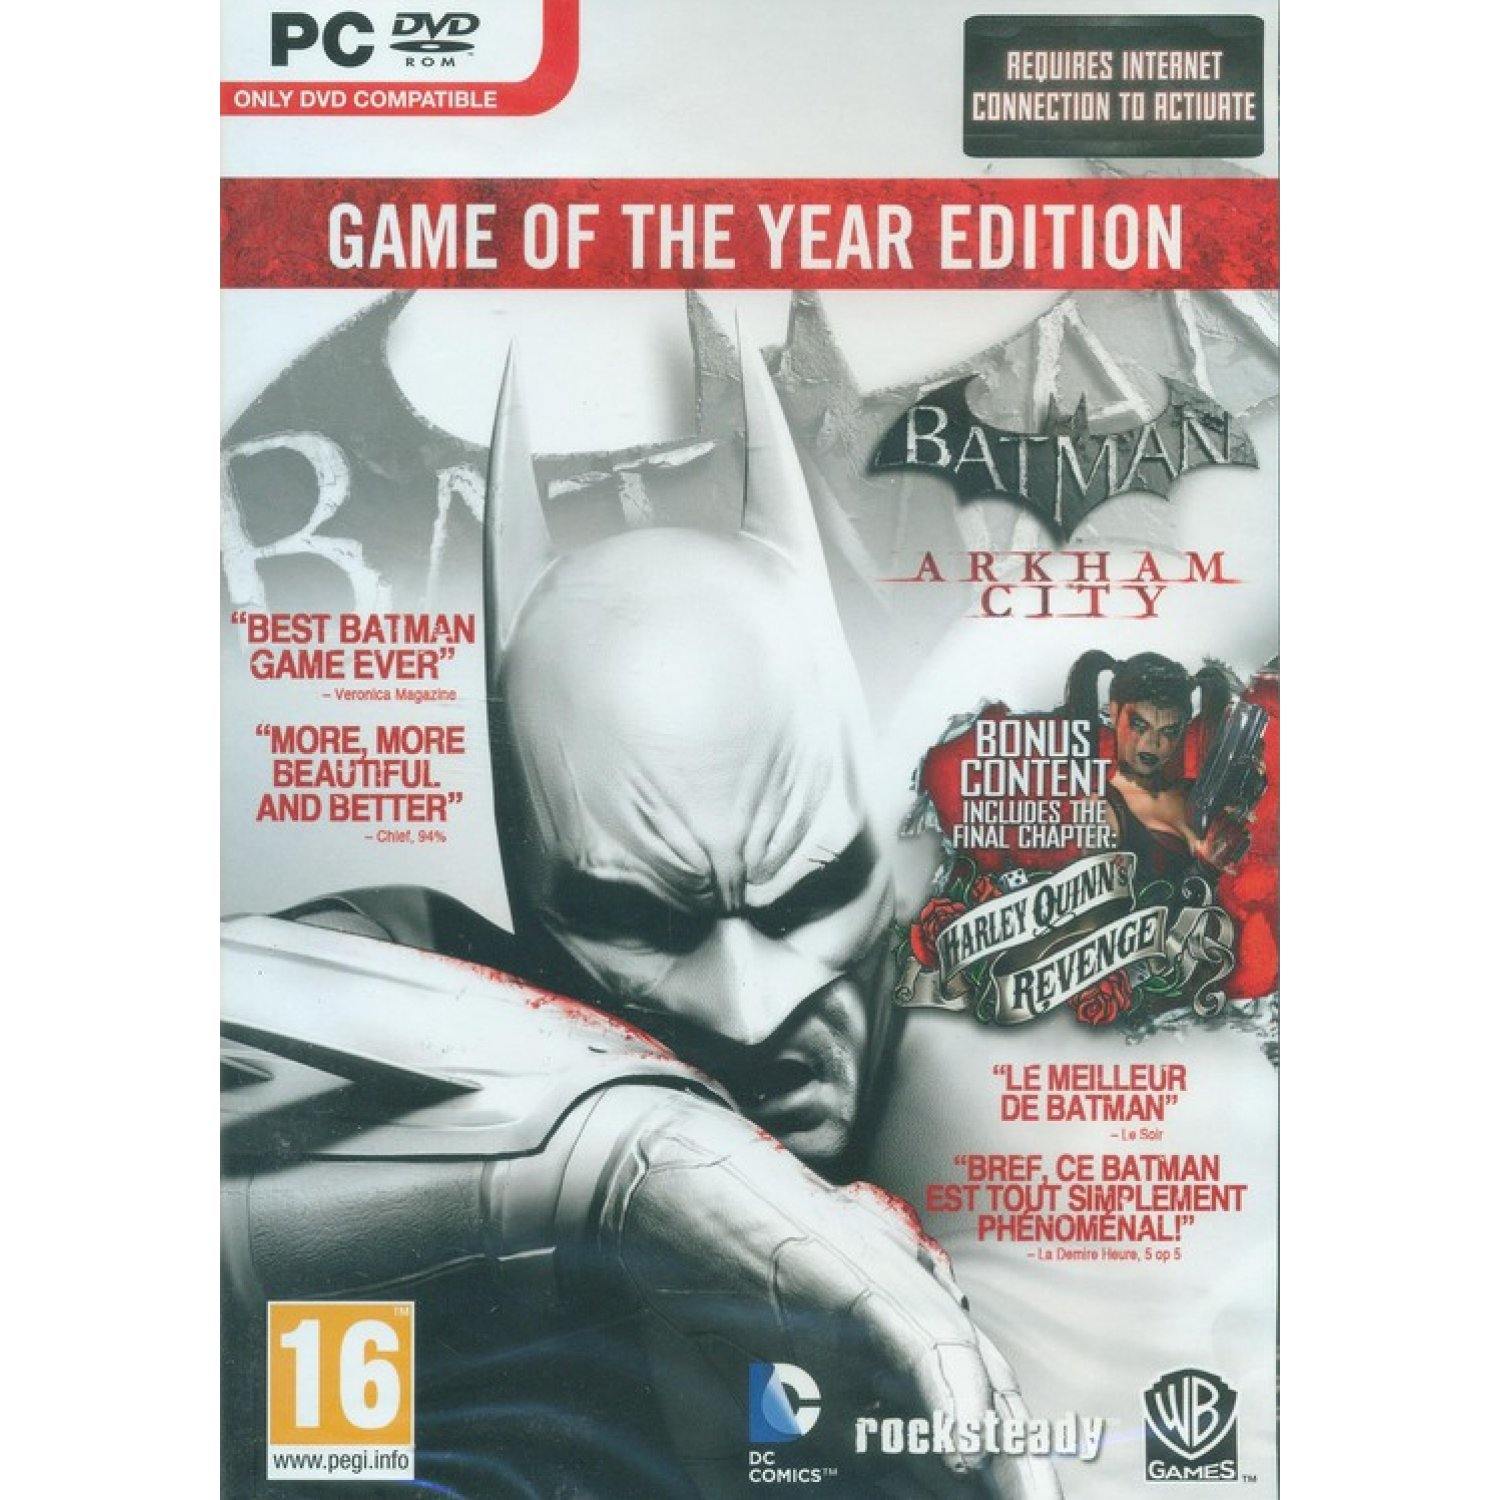 PC Batman Arkham City Game of the Year Edition – Games Crazy Deals